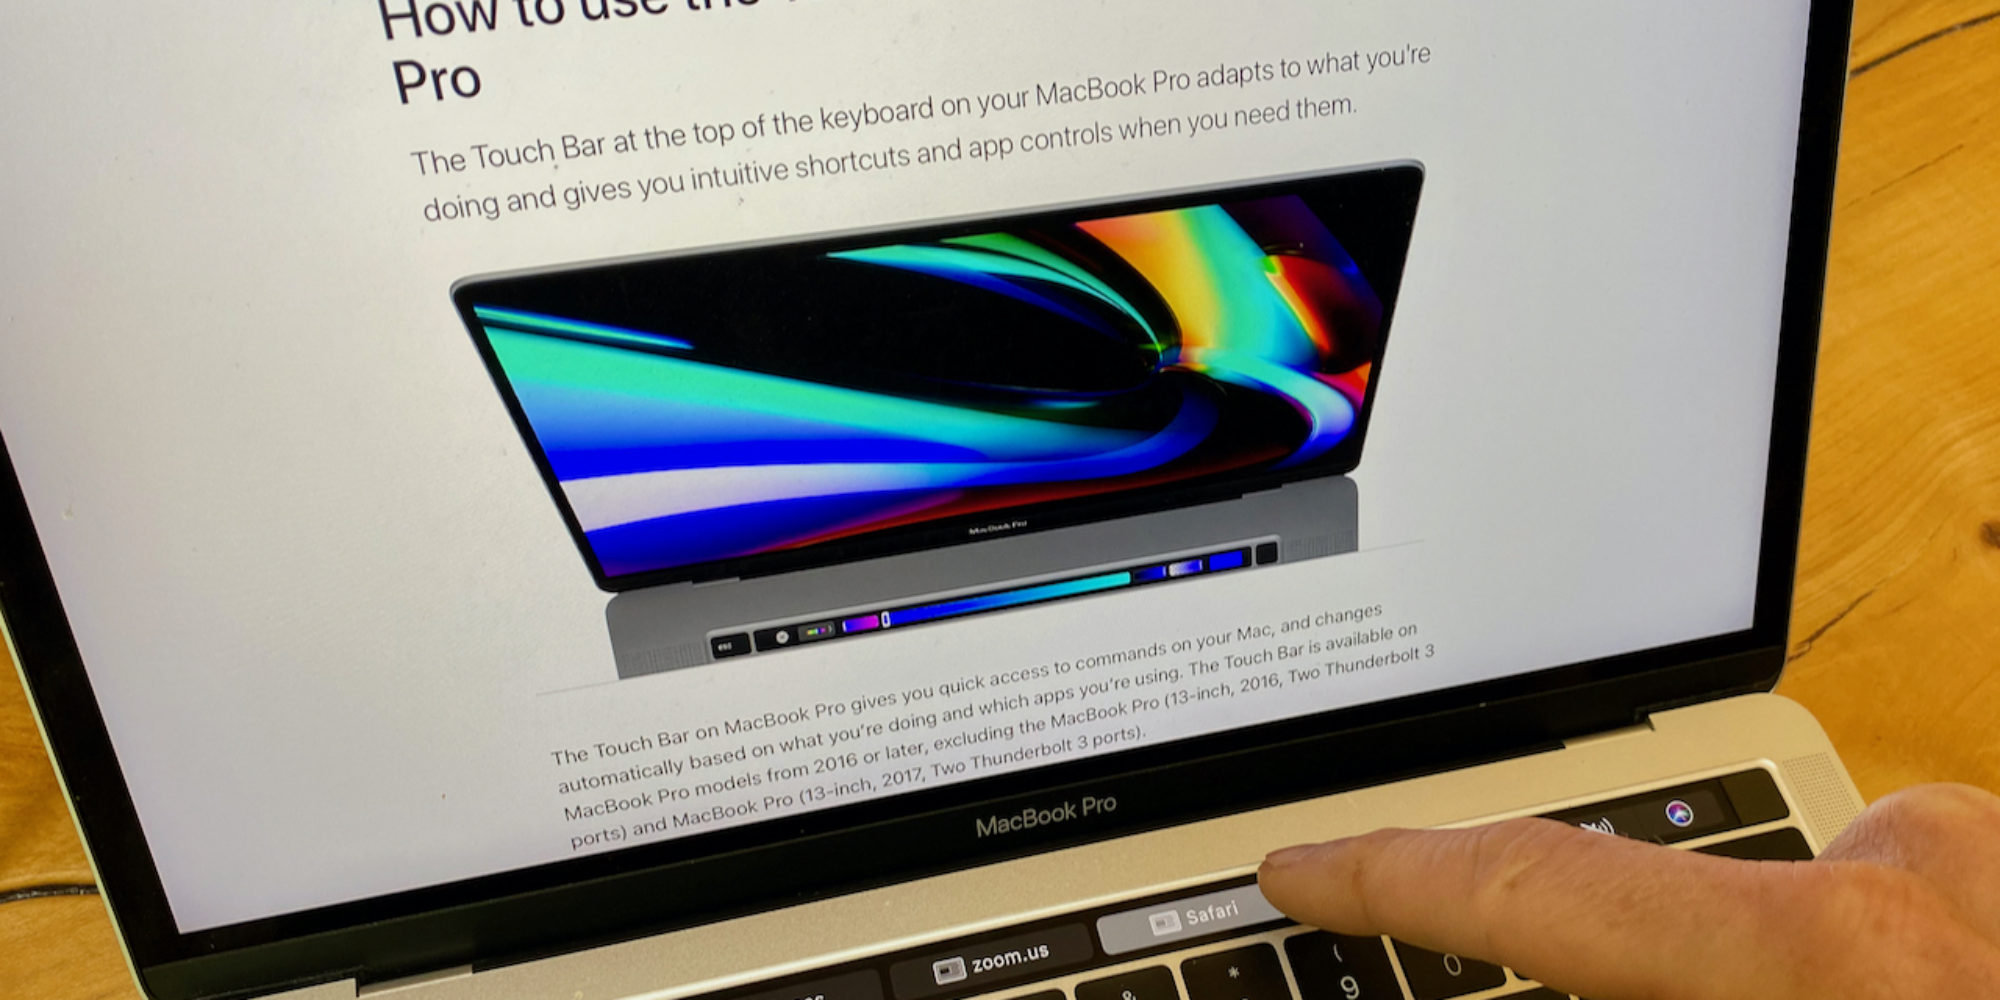 Are You Making the Most of the Touch Bar on Your MacBook Pro?